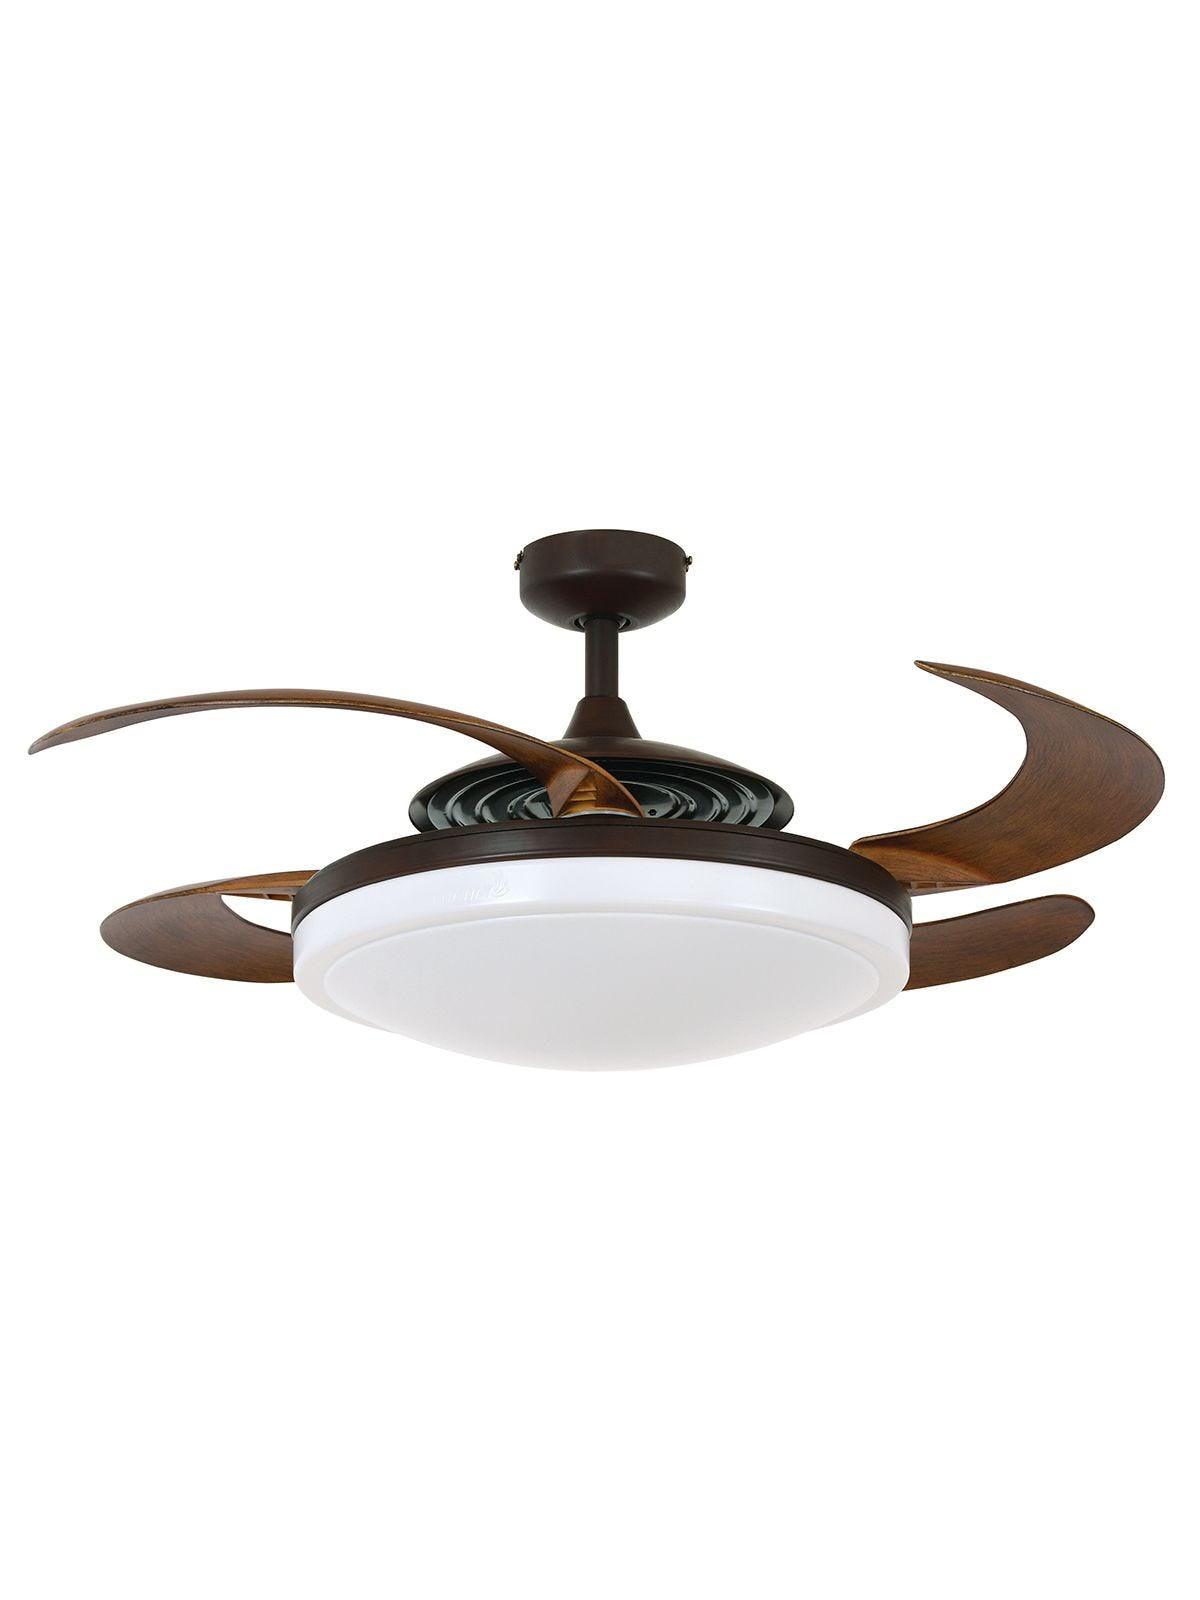 Steel with Retractable Blade Ceiling Fan - LV LIGHTING